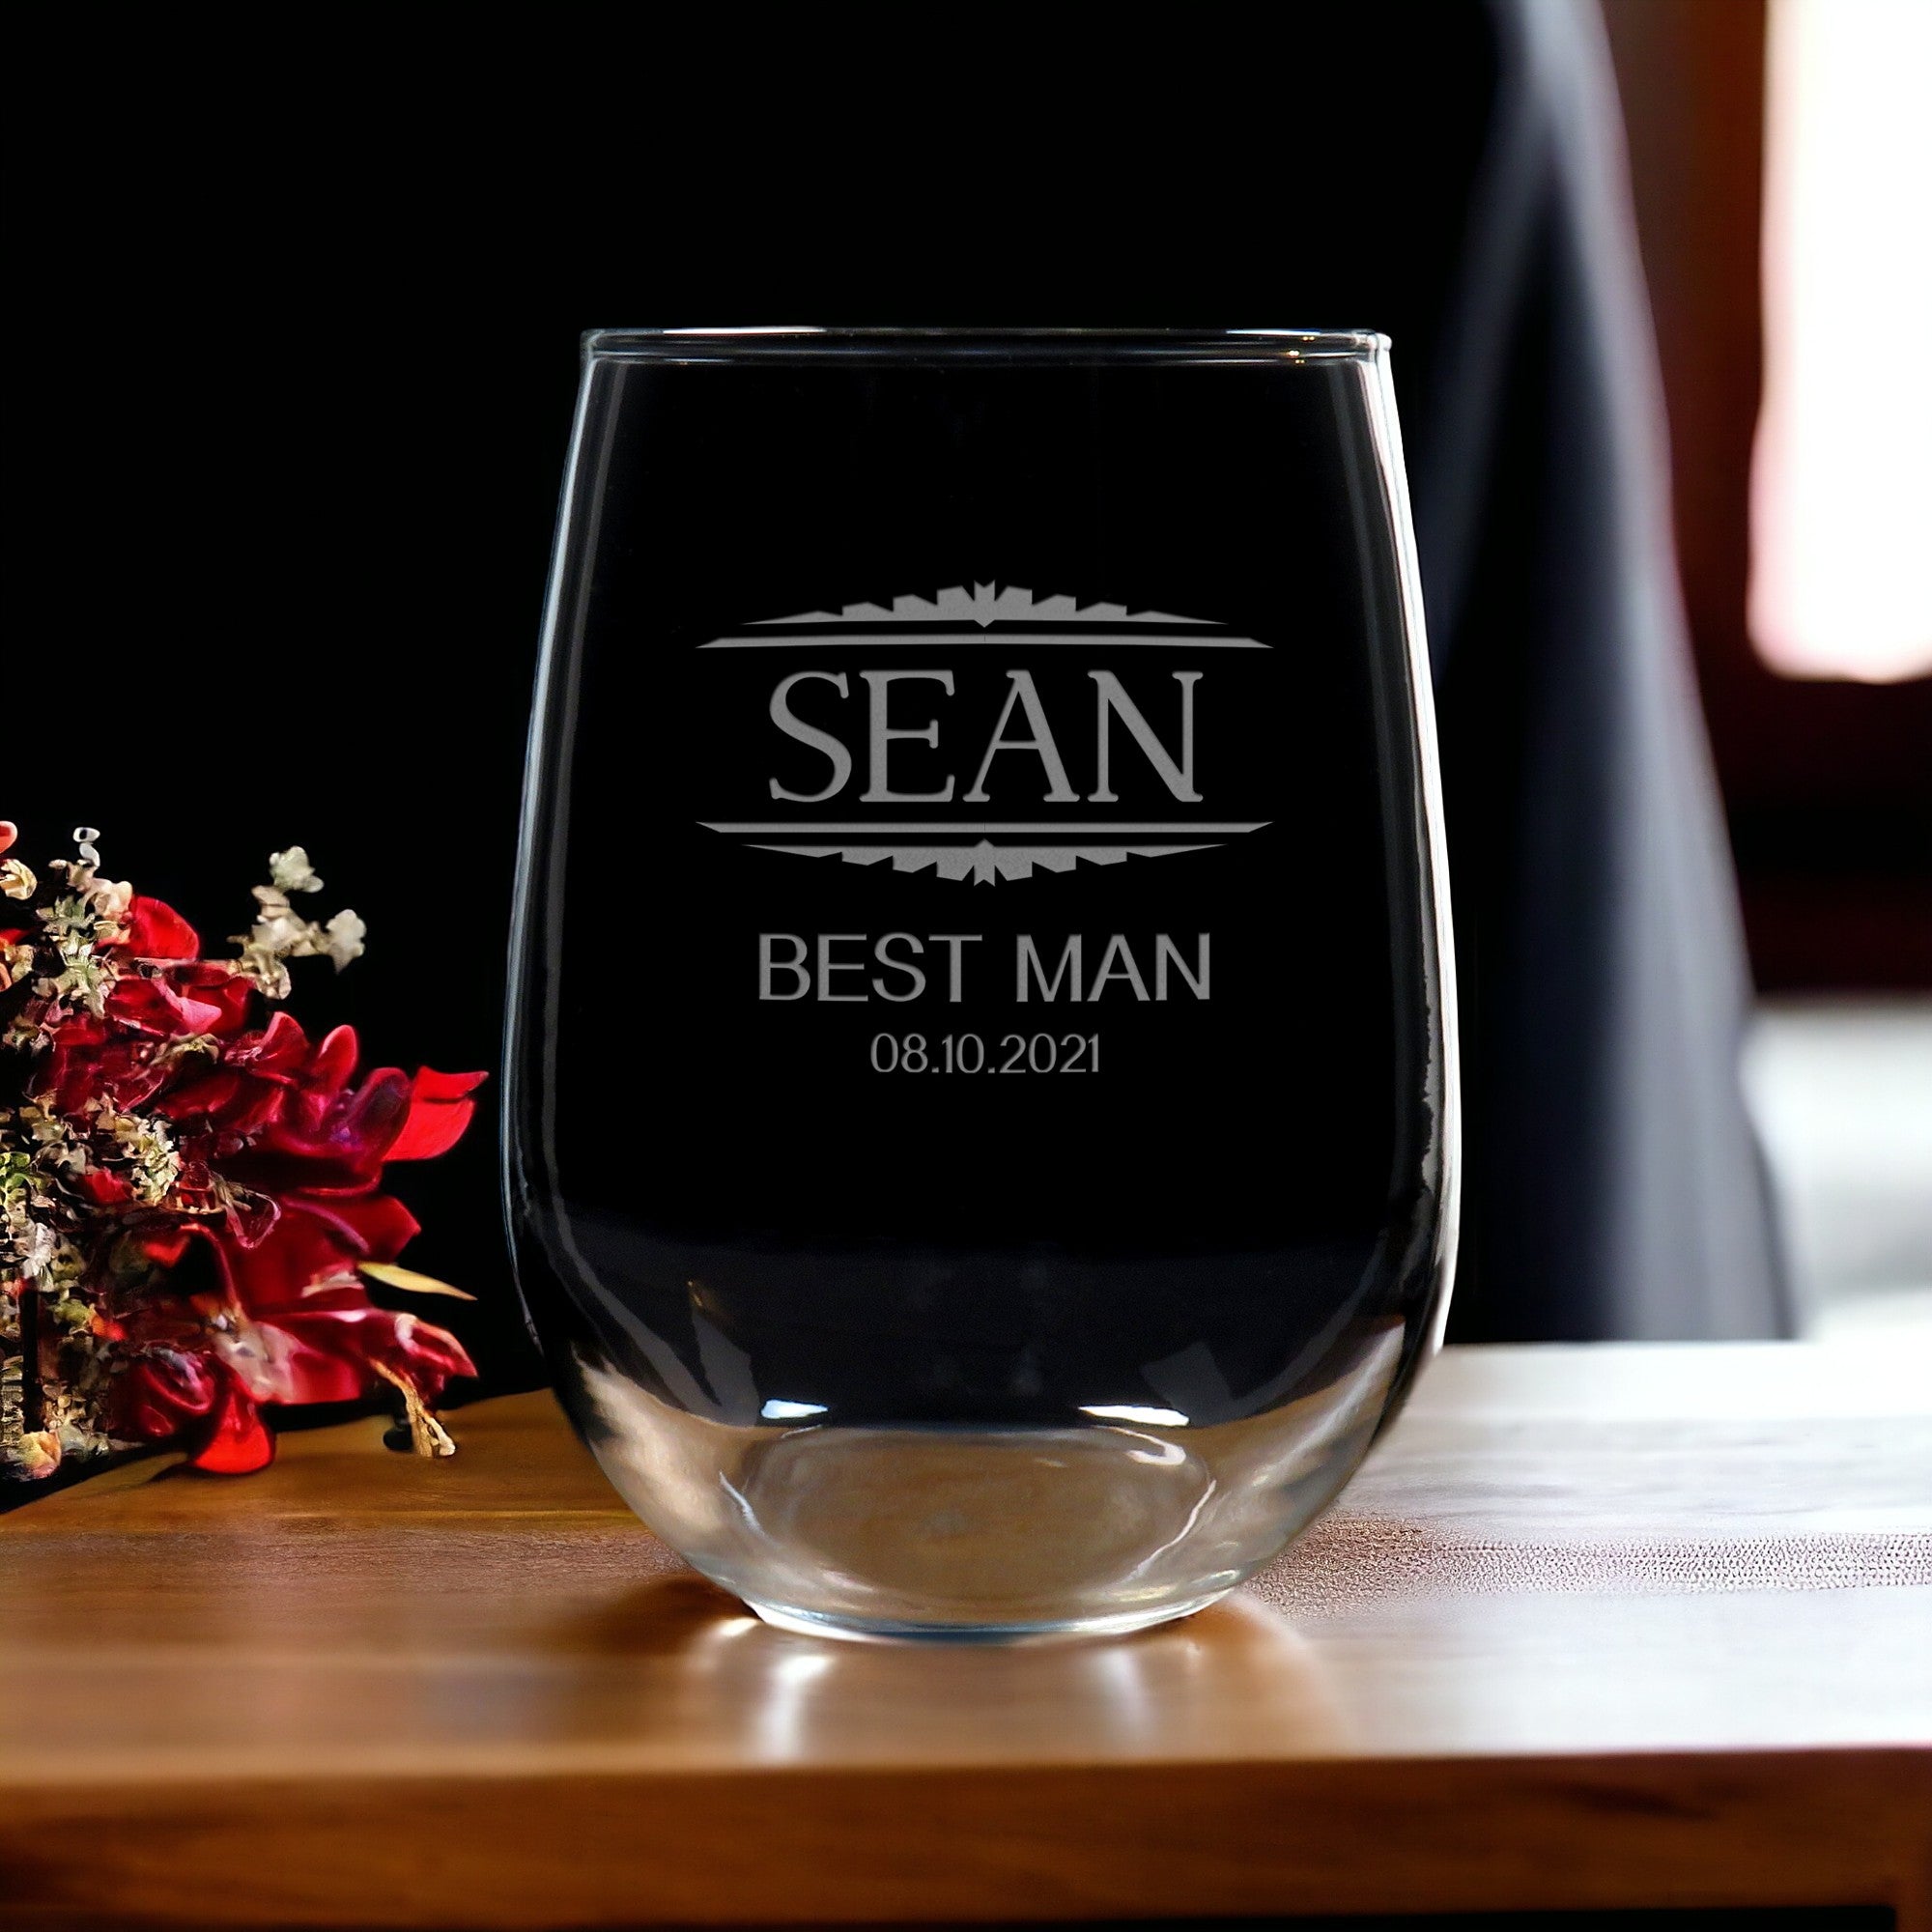 Wedding Party 17oz Stemless Wine Glass - Deeply Etched Personalized Gift for Best Man, Groomsman, Father of the Bride and Groom